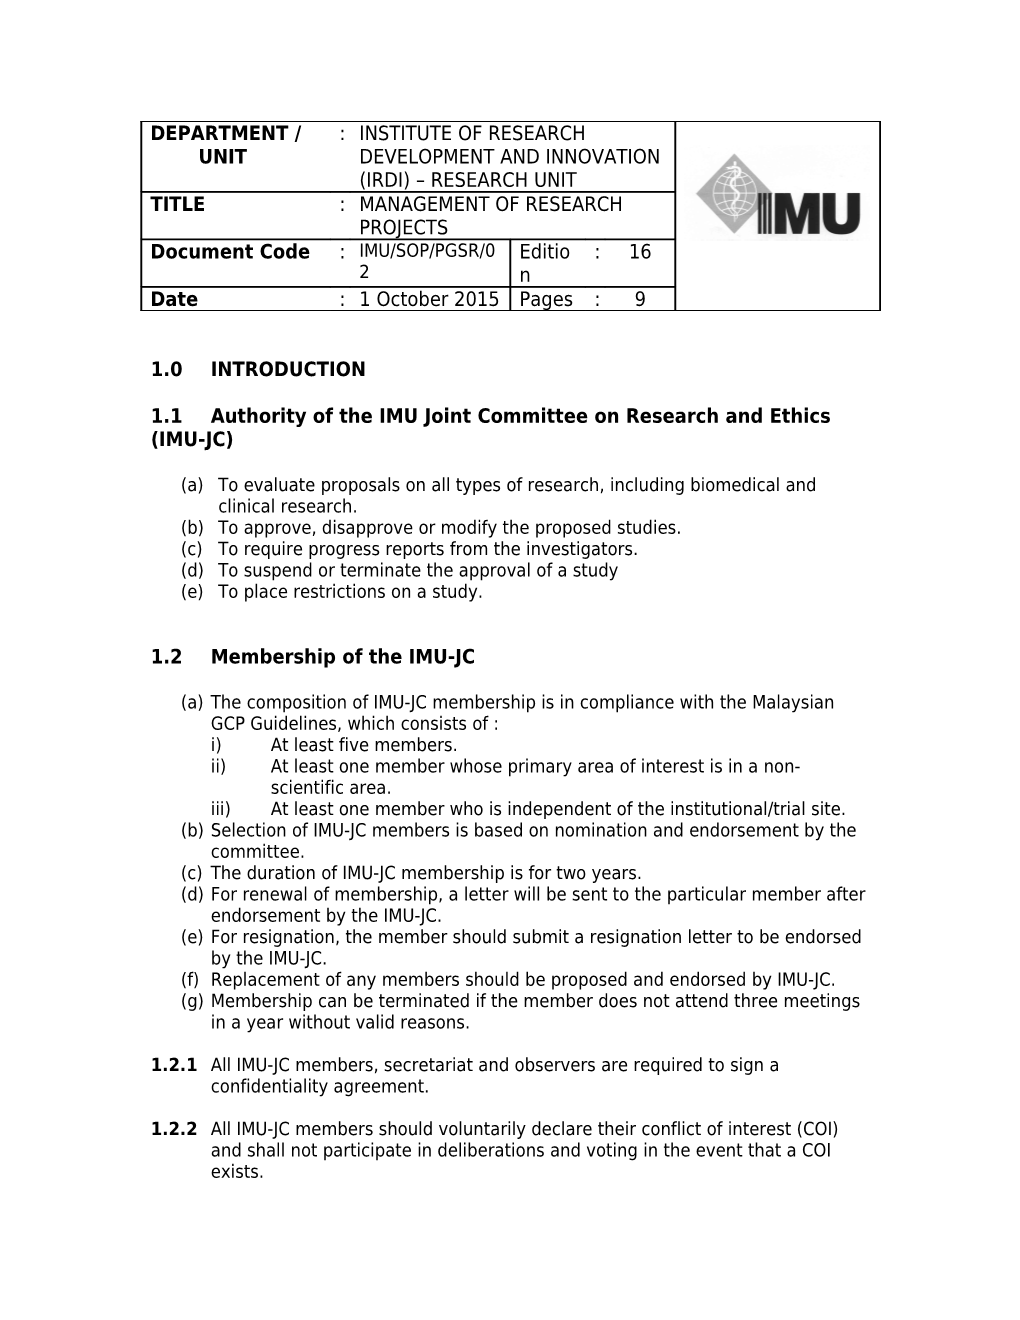 1.1Authority of the IMU Joint Committee on Research and Ethics (IMU-JC)